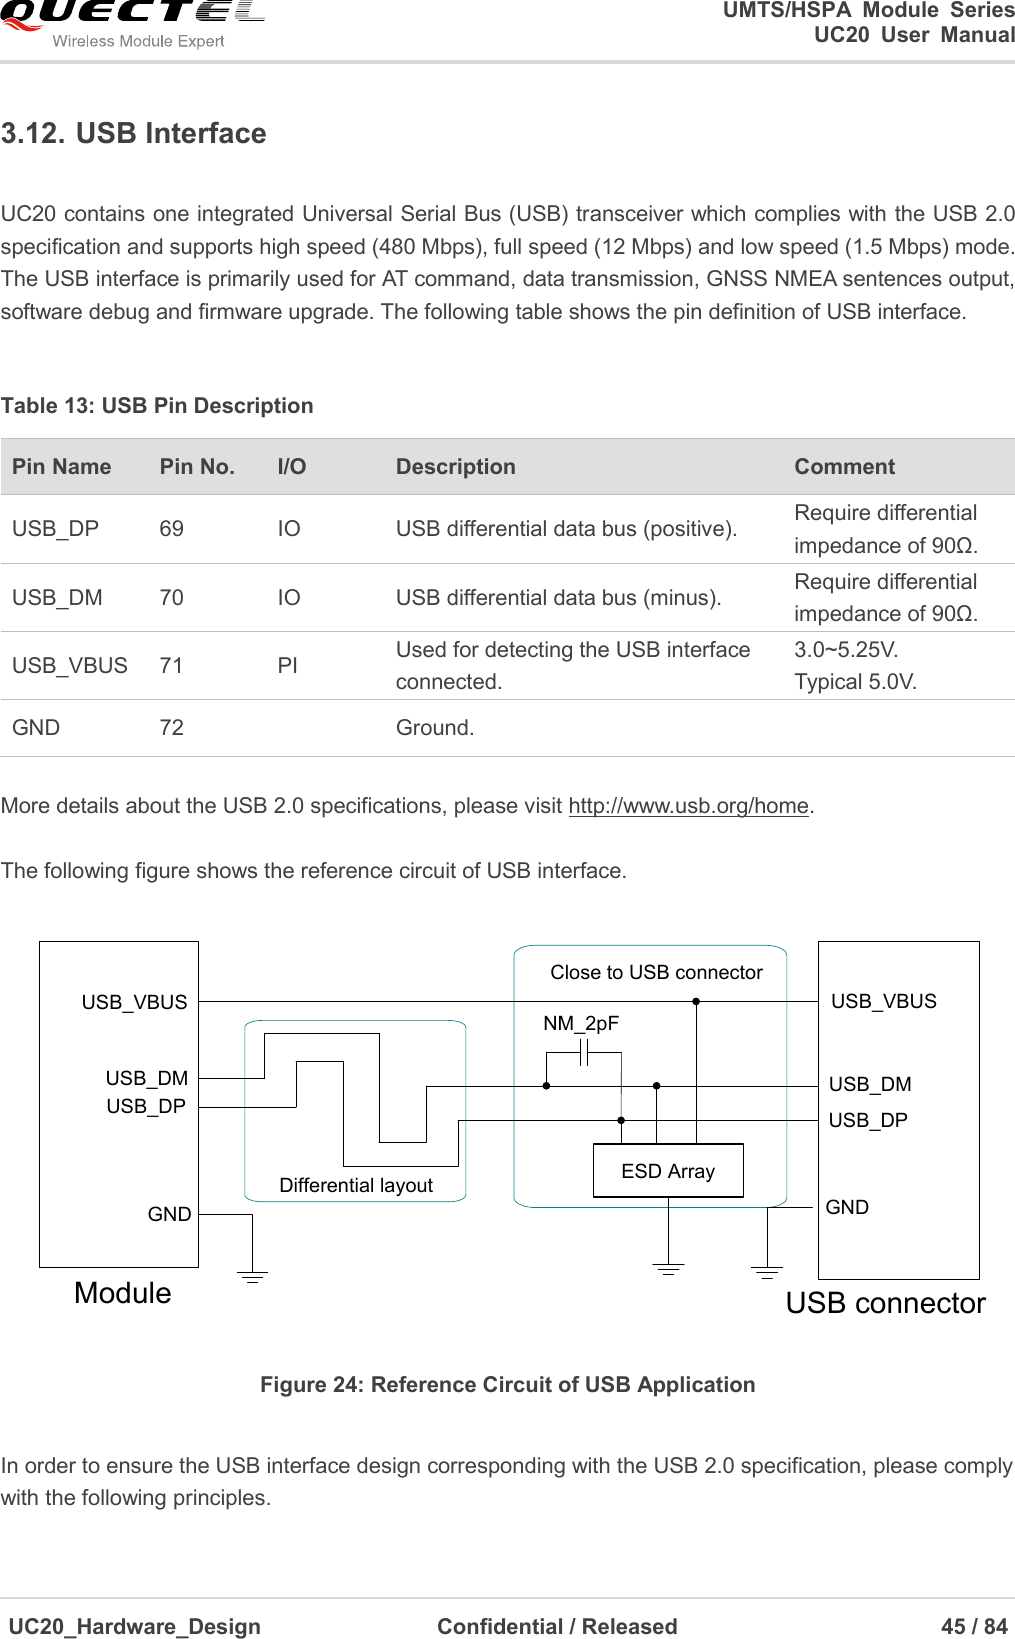                                                                                                                                               UMTS/HSPA  Module  Series                                                                 UC20  User  Manual  UC20_Hardware_Design                  Confidential / Released                            45 / 84     3.12. USB Interface  UC20 contains one integrated Universal Serial Bus (USB) transceiver which complies with the USB 2.0 specification and supports high speed (480 Mbps), full speed (12 Mbps) and low speed (1.5 Mbps) mode. The USB interface is primarily used for AT command, data transmission, GNSS NMEA sentences output, software debug and firmware upgrade. The following table shows the pin definition of USB interface.    Table 13: USB Pin Description Pin Name   Pin No. I/O Description   Comment USB_DP 69 IO USB differential data bus (positive). Require differential impedance of 90Ω. USB_DM 70 IO USB differential data bus (minus). Require differential impedance of 90Ω. USB_VBUS 71 PI Used for detecting the USB interface connected. 3.0~5.25V. Typical 5.0V. GND 72  Ground.   More details about the USB 2.0 specifications, please visit http://www.usb.org/home.  The following figure shows the reference circuit of USB interface. ModuleUSB_VBUSUSB_DPUSB_DMGNDUSB connectorClose to USB connectorDifferential layoutUSB_VBUSUSB_DPUSB_DMGNDESD ArrayNM_2pF Figure 24: Reference Circuit of USB Application  In order to ensure the USB interface design corresponding with the USB 2.0 specification, please comply with the following principles.  